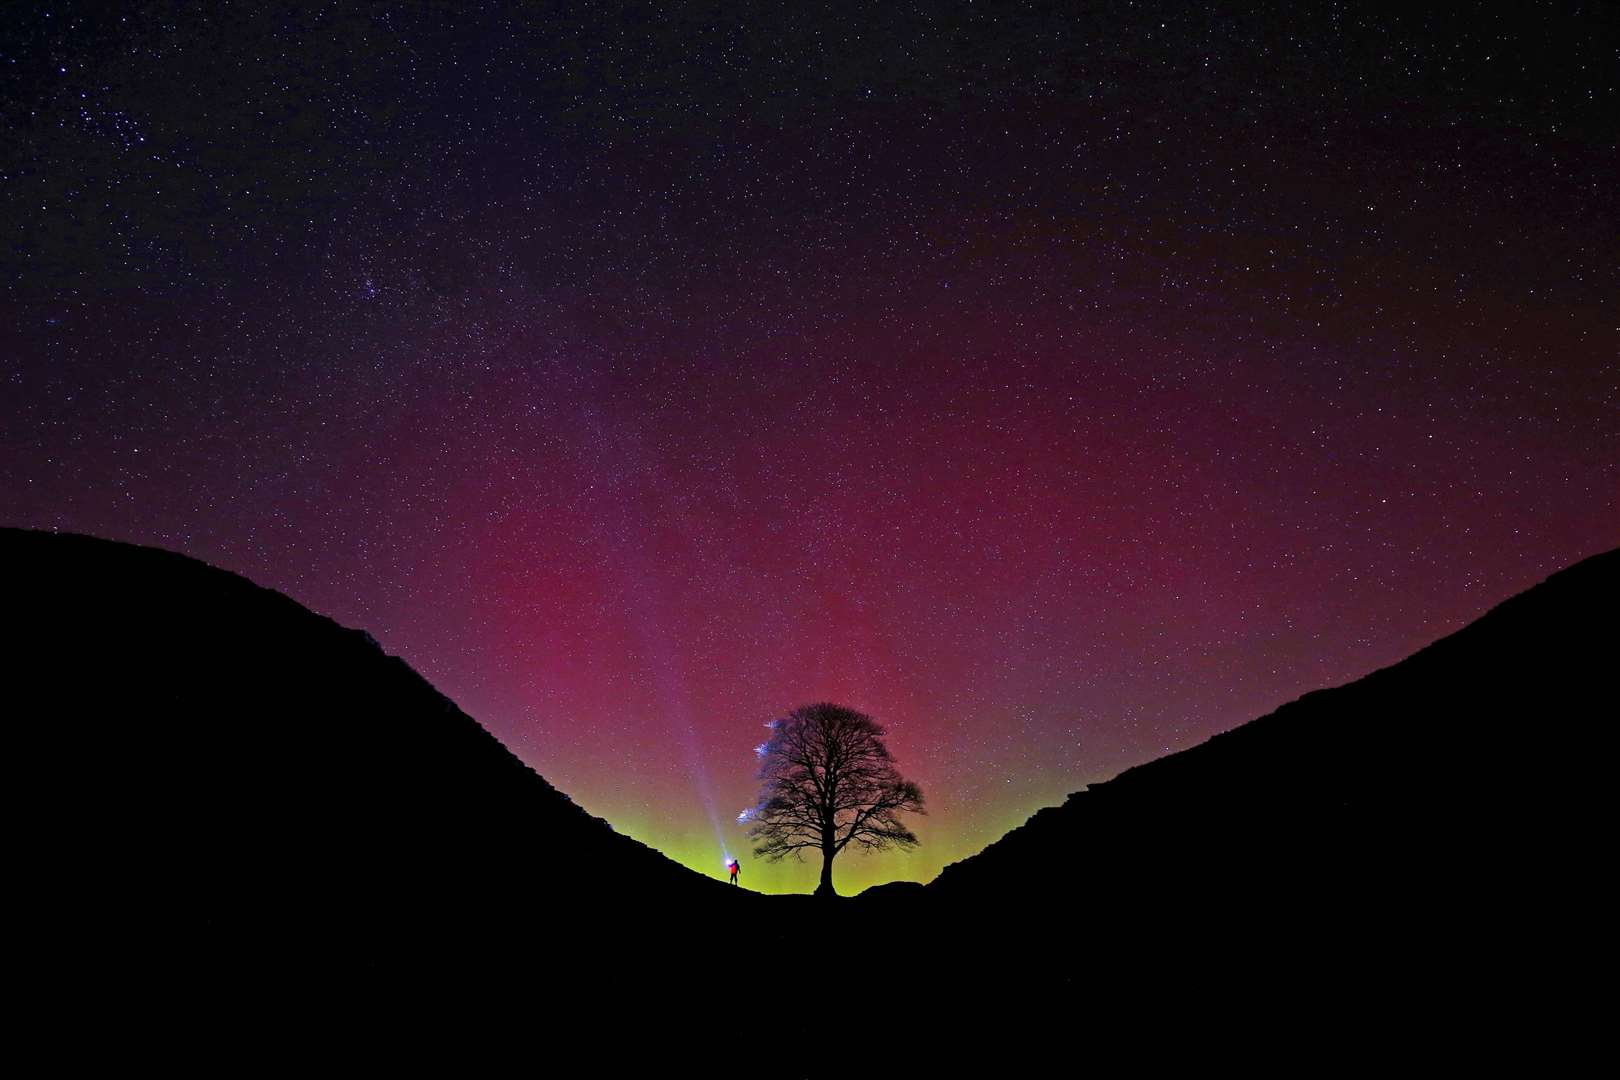 Colours of the Northern Lights behind the Sycamore Gap tree (Owen Humphreys/PA)